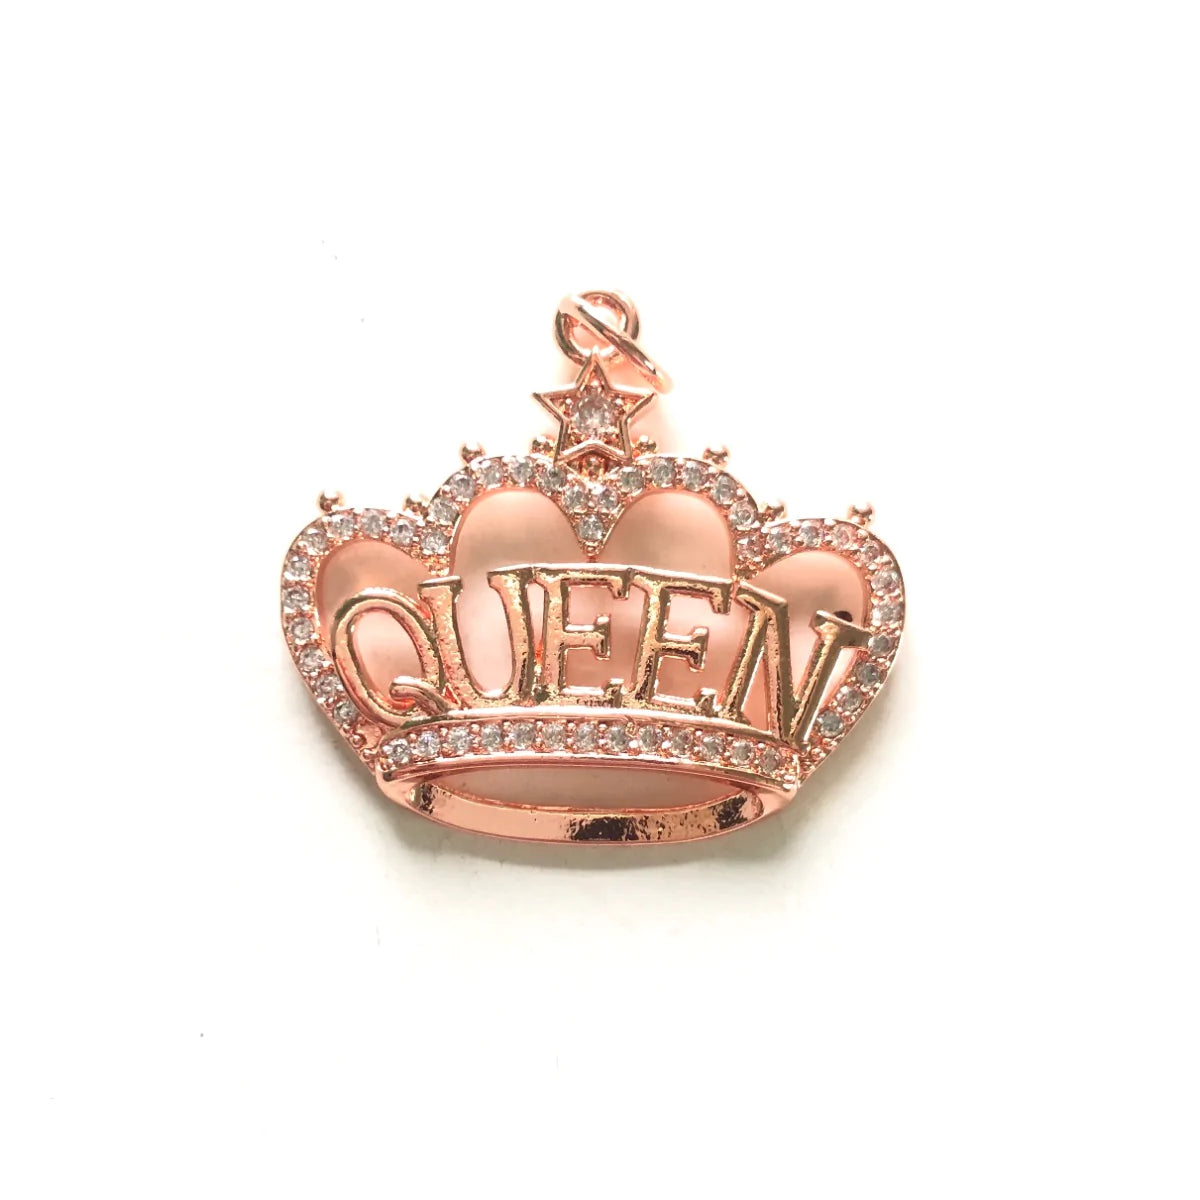 10pcs/lot 28*25mm CZ Paved Crown Queen Word Charms CZ Paved Charms Crowns New Charms Arrivals Queen Charms Charms Beads Beyond